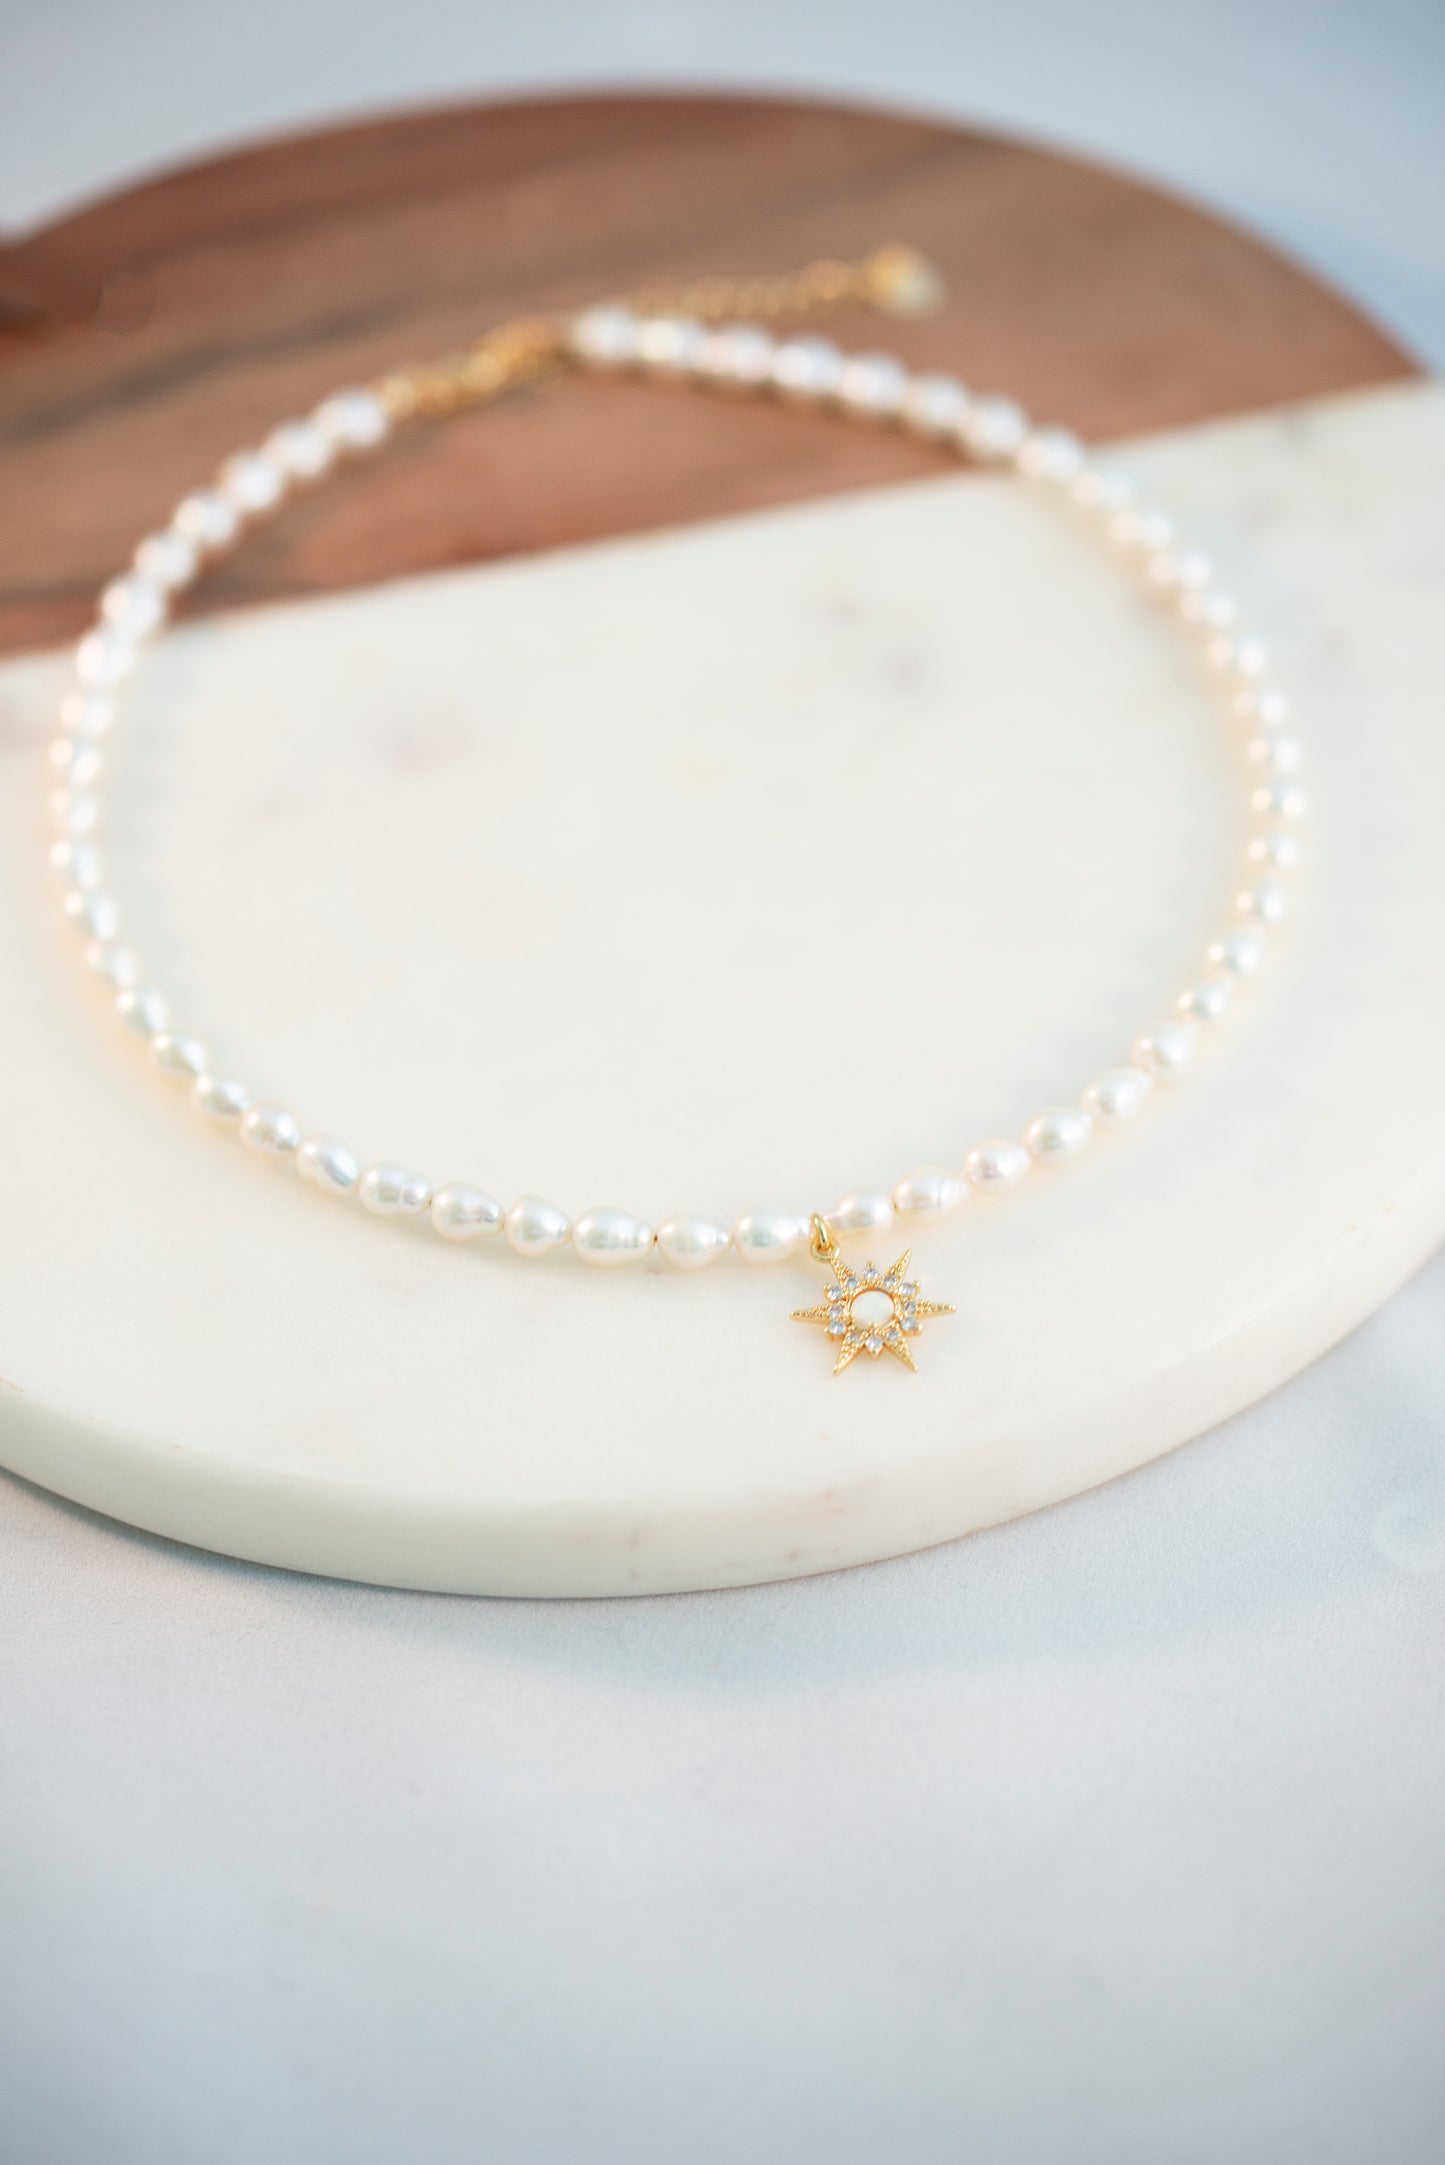 Freshwater Pearl Necklace with Gold Filled Starburst Pendant